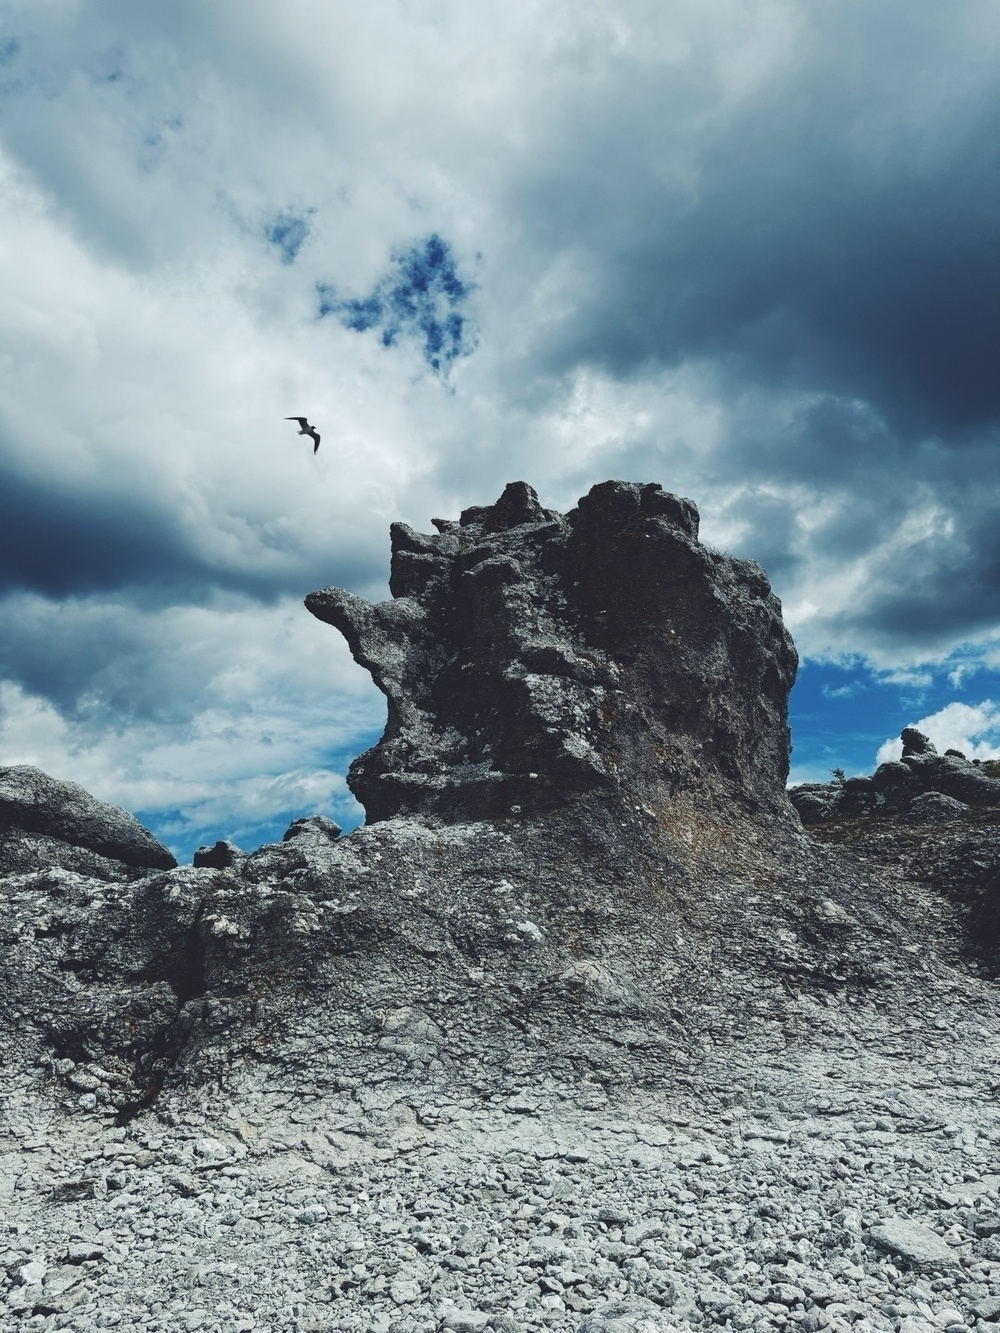 A rugged limestone formation stands prominently against a dramatic cloudy sky. The rock has an uncanny resemblance to a face, with pronounced features suggesting a nose and chin.